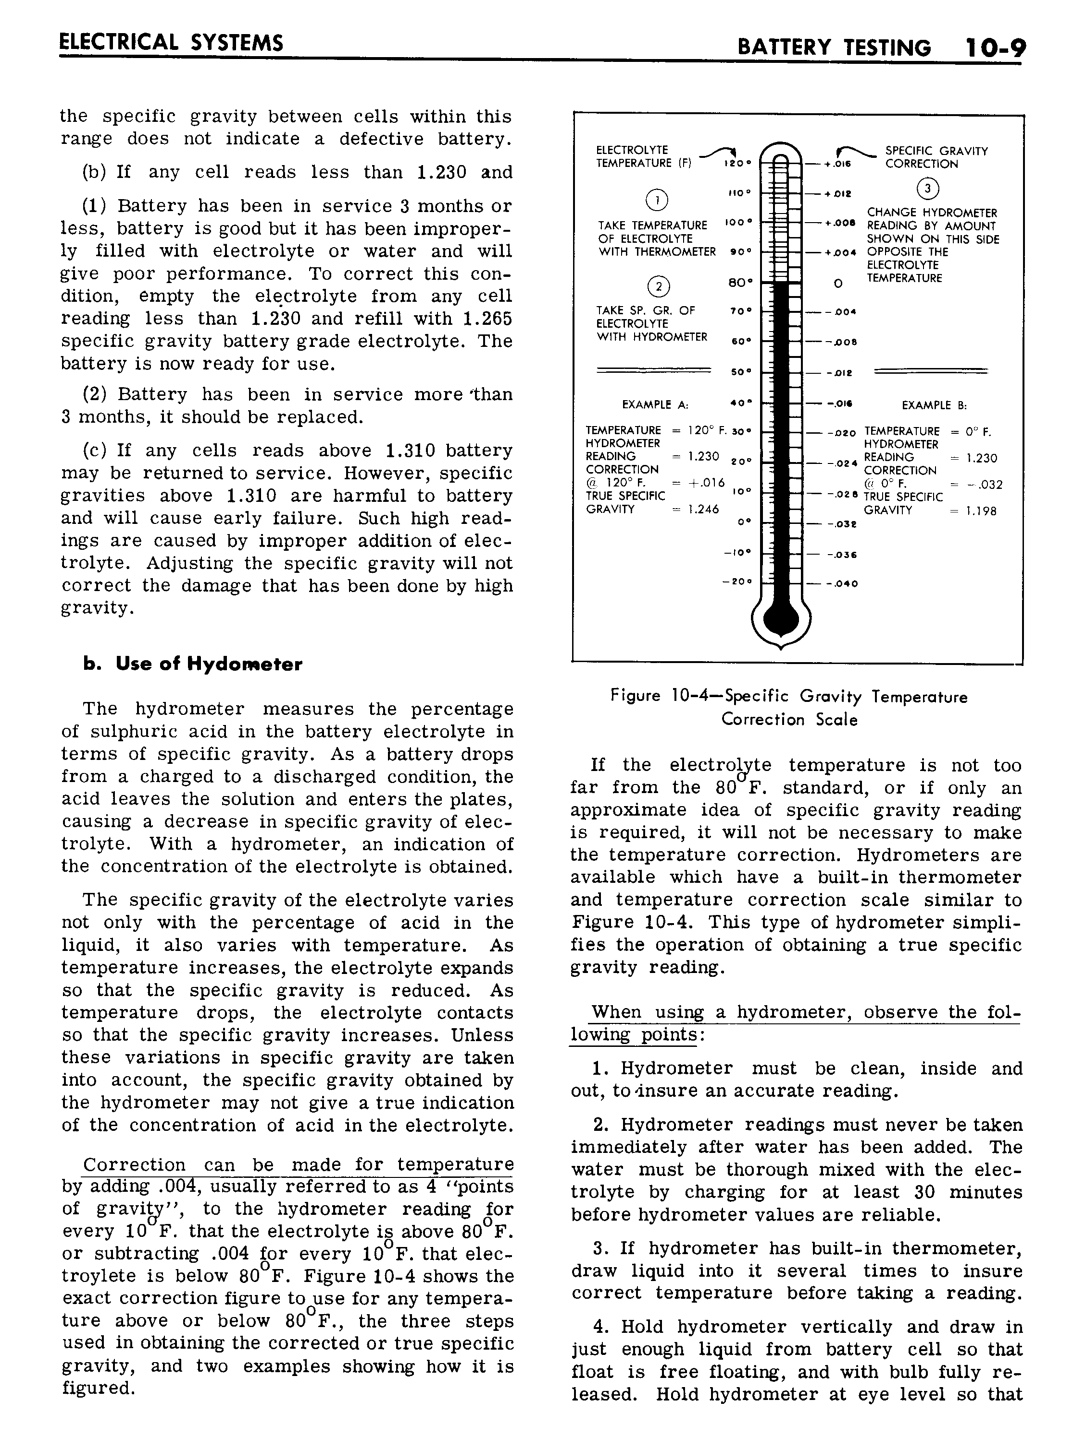 n_10 1961 Buick Shop Manual - Electrical Systems-009-009.jpg